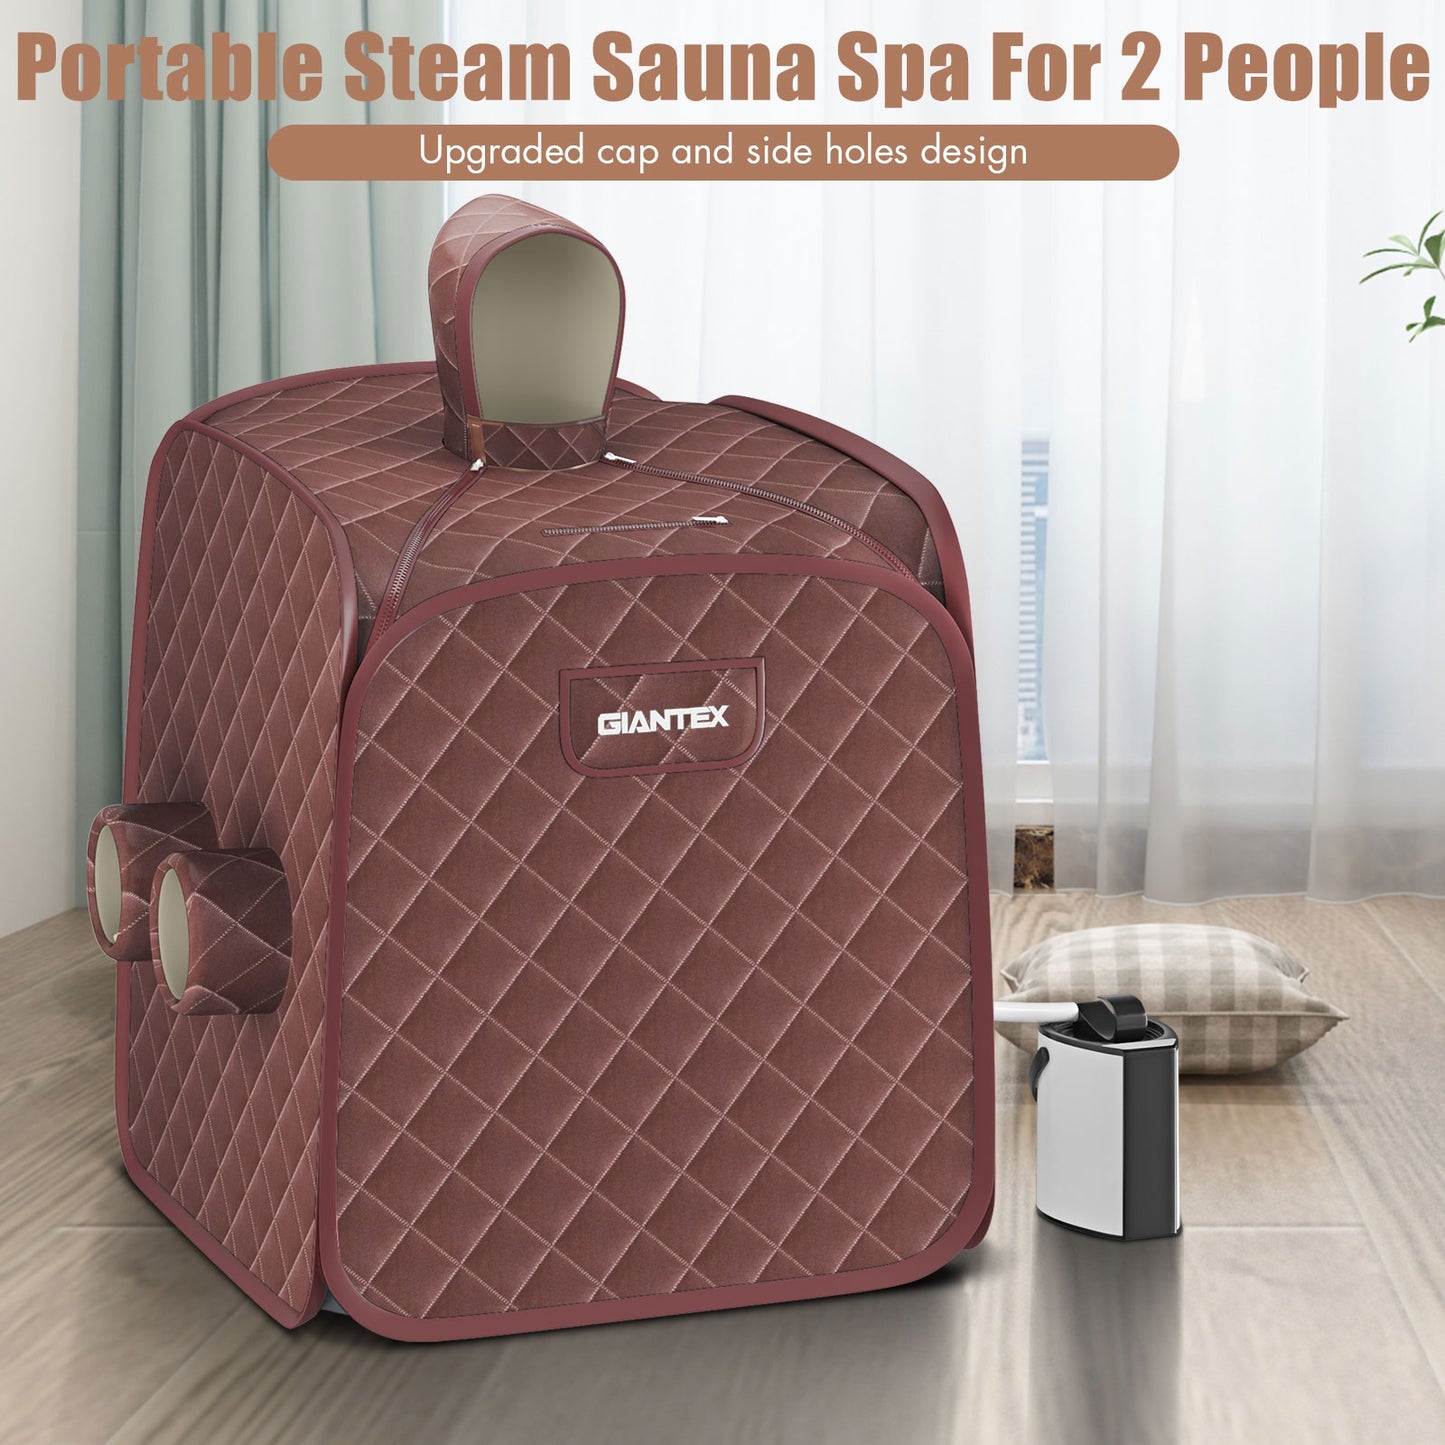 800W 2 Person Portable Steam Sauna Tent SPA with Hat Side Holes 3L Steamer-Coffee